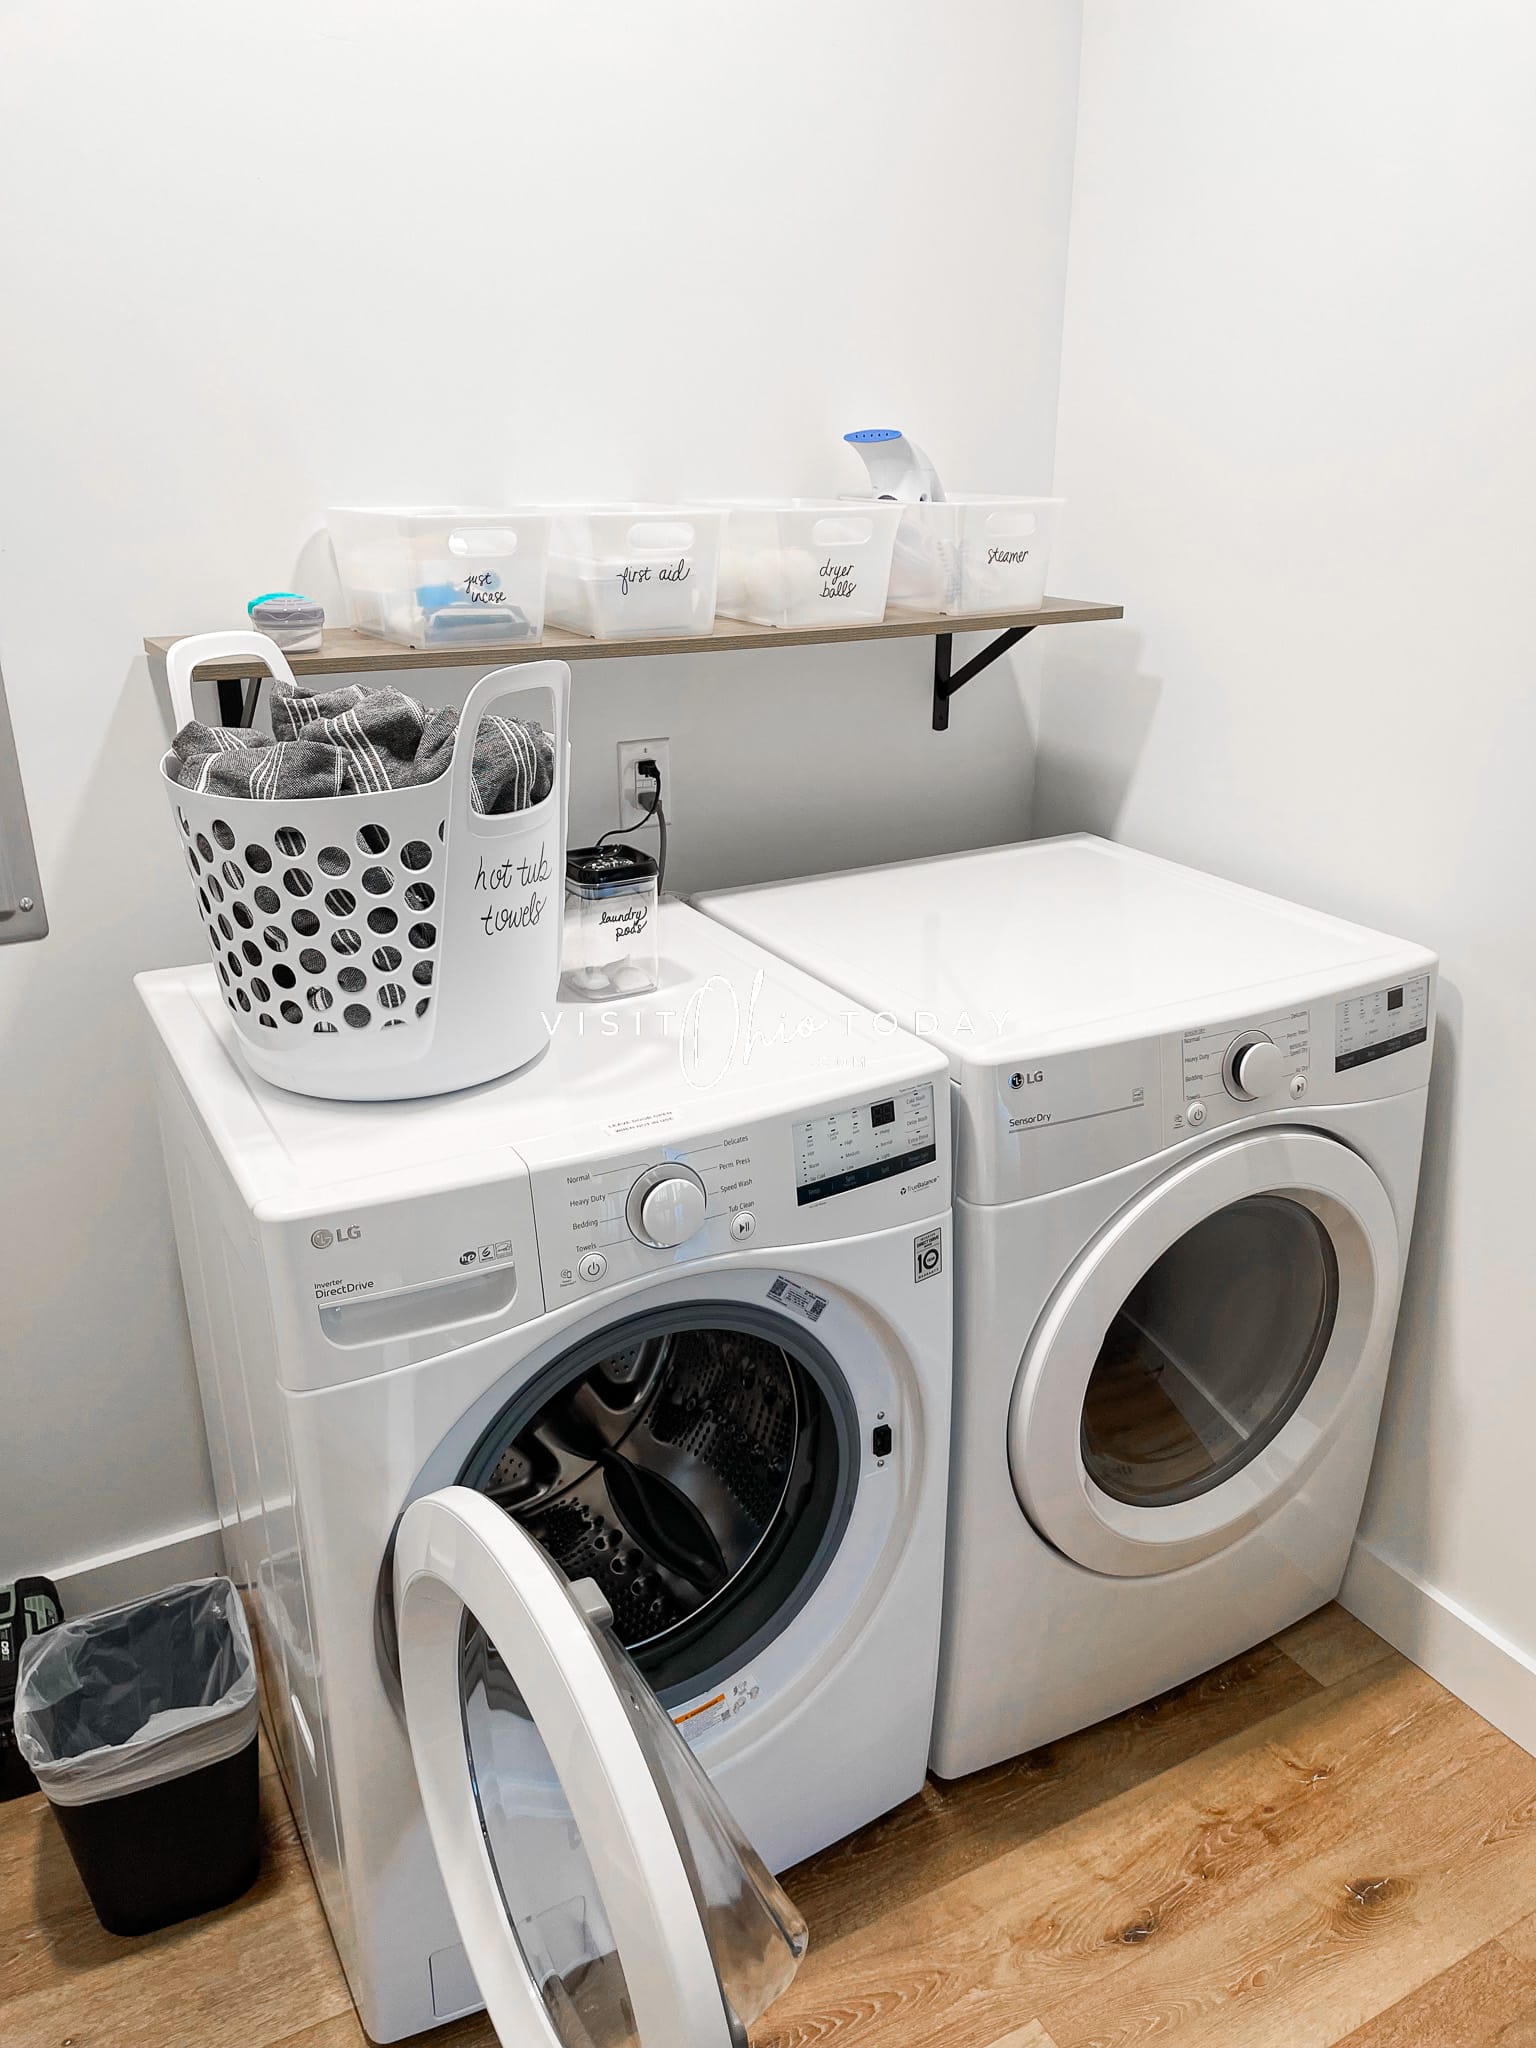 laundry machine with bin of towels on top